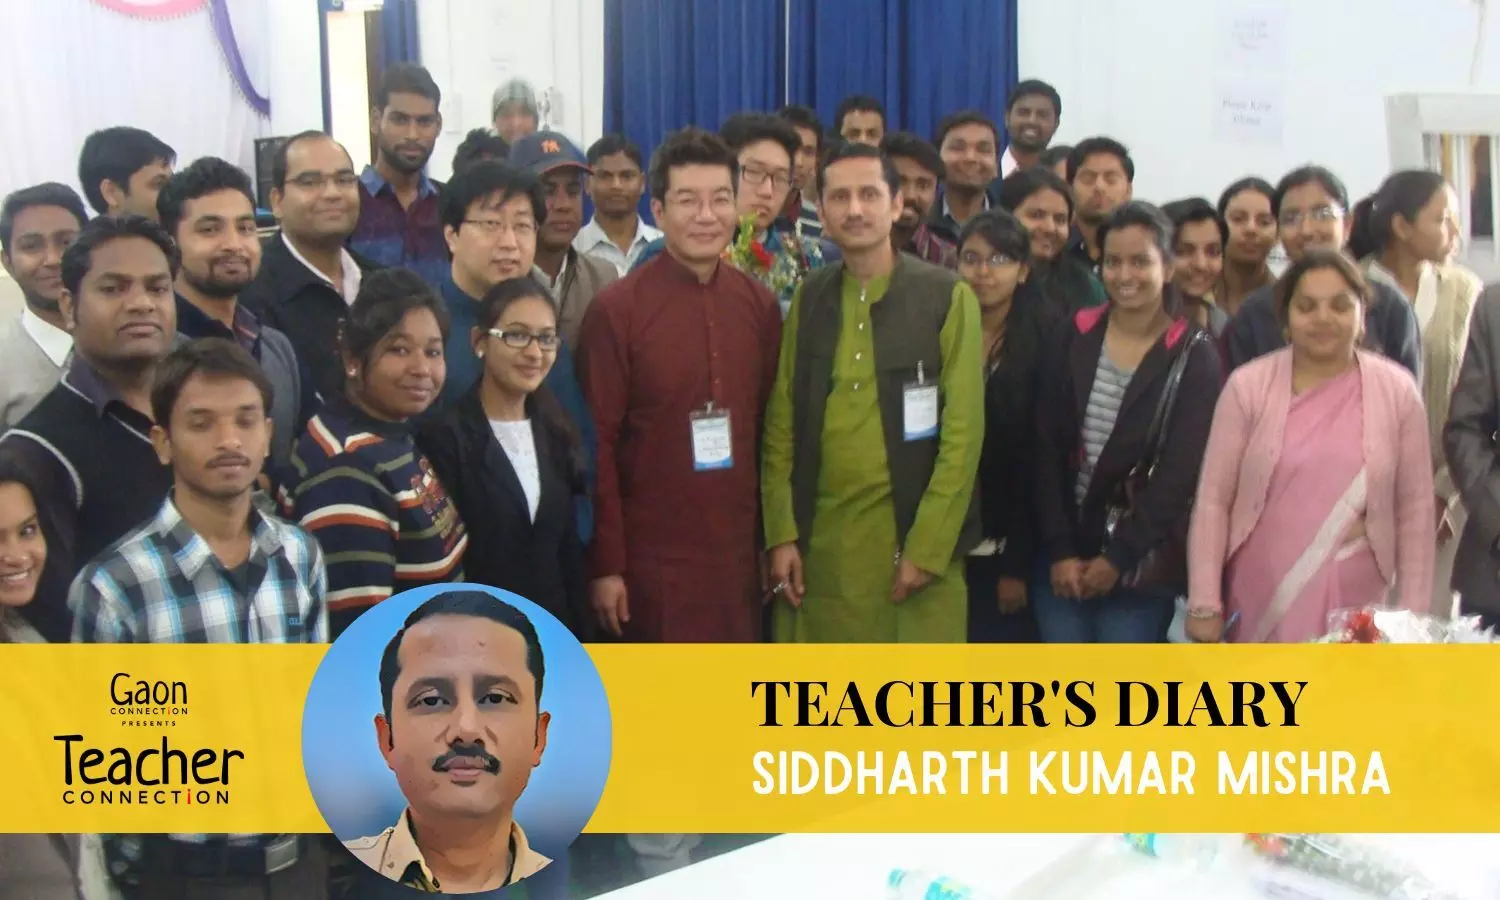 Teachers’ Diary: Giving up a lucrative job in South Korea, a botanist returned home to teach students in India